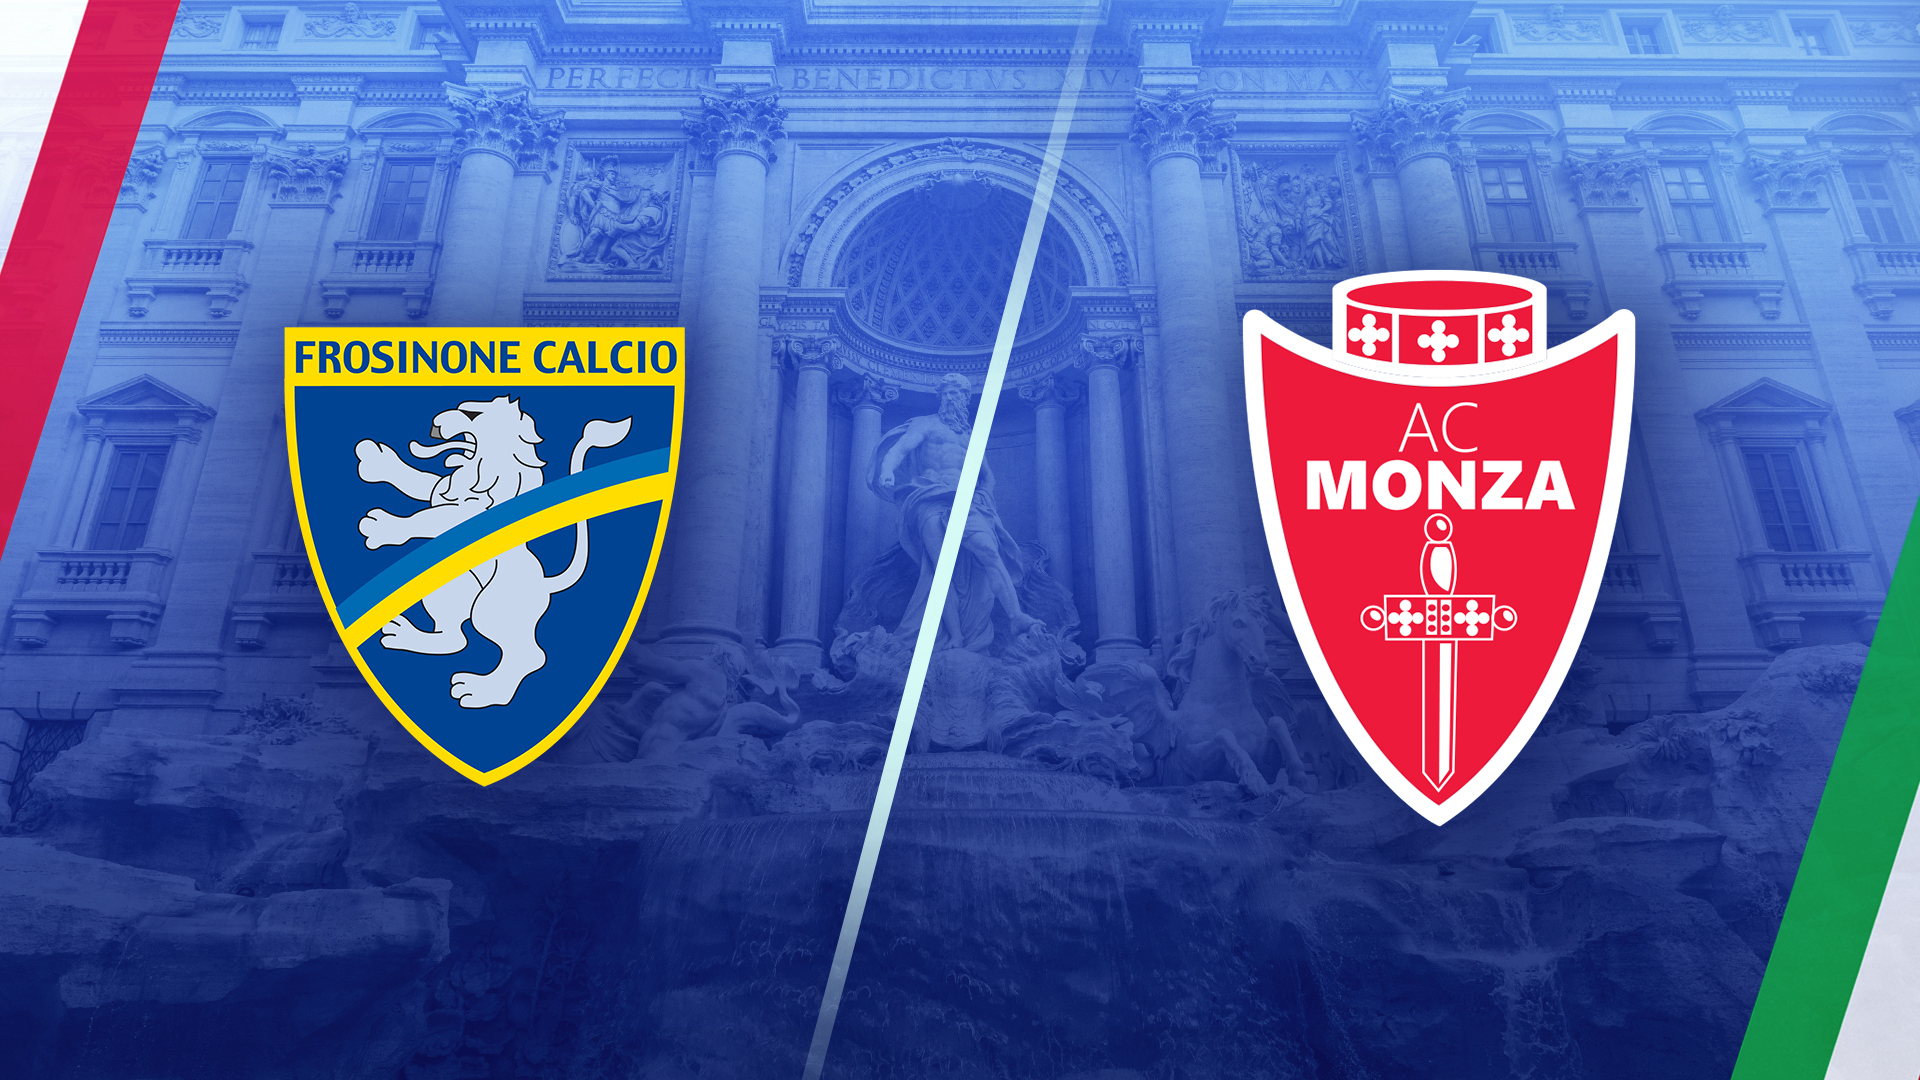 Watch Serie A: Frosinone vs. Monza - Full show on Paramount Plus